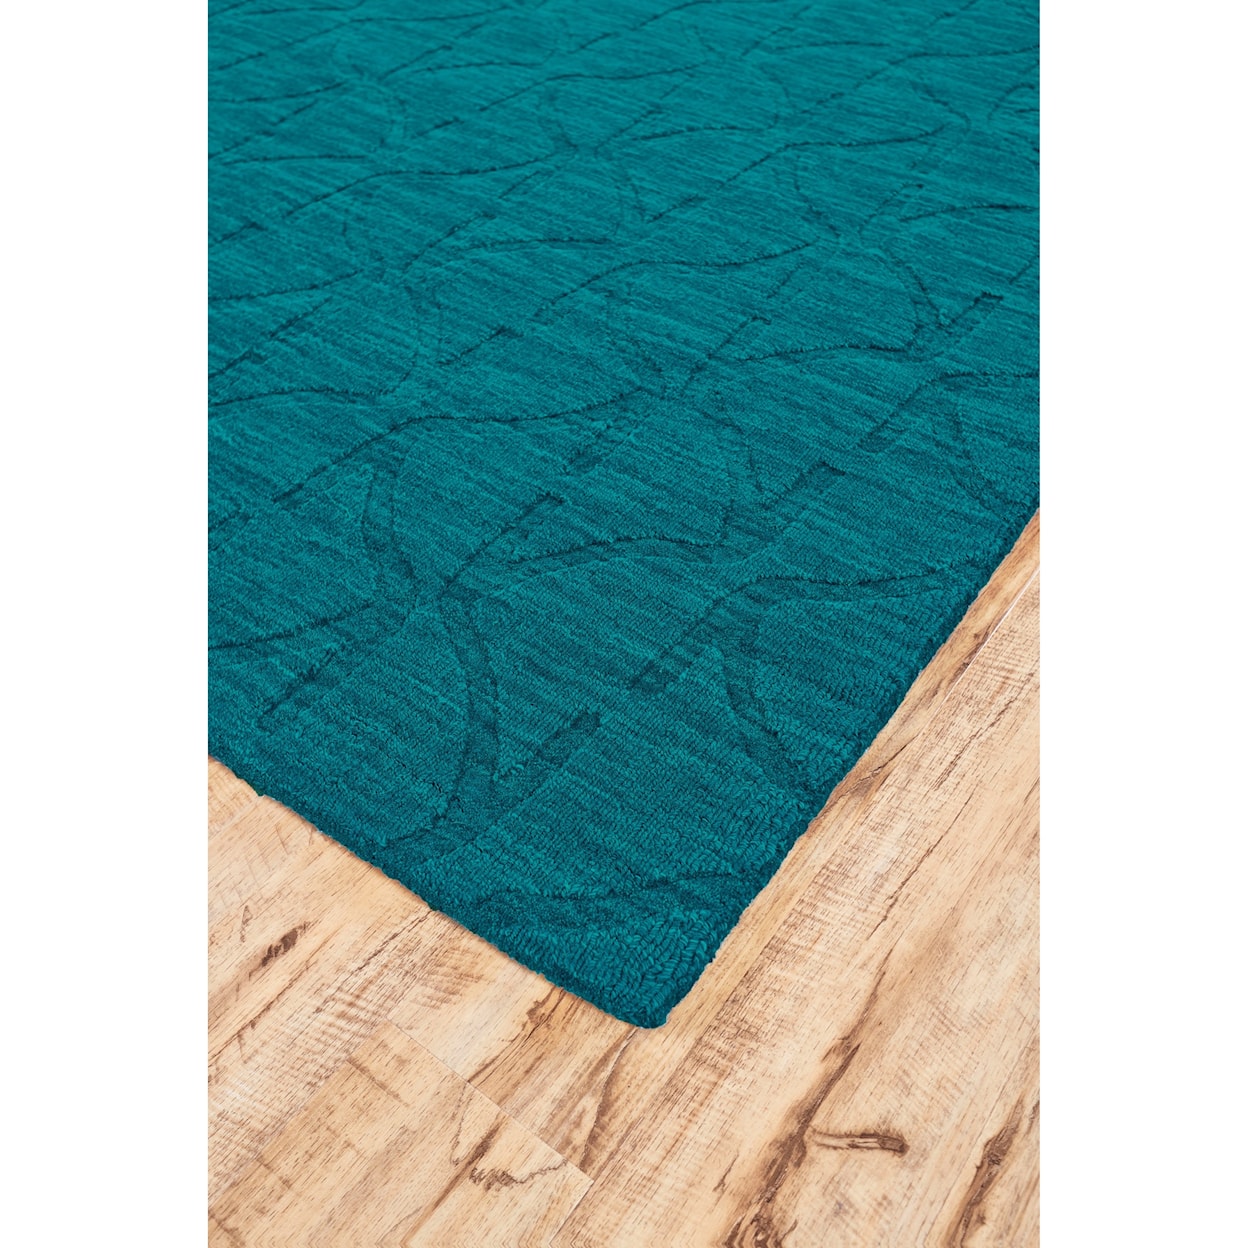 Feizy Rugs Soma Teal 8' X 11' Area Rug